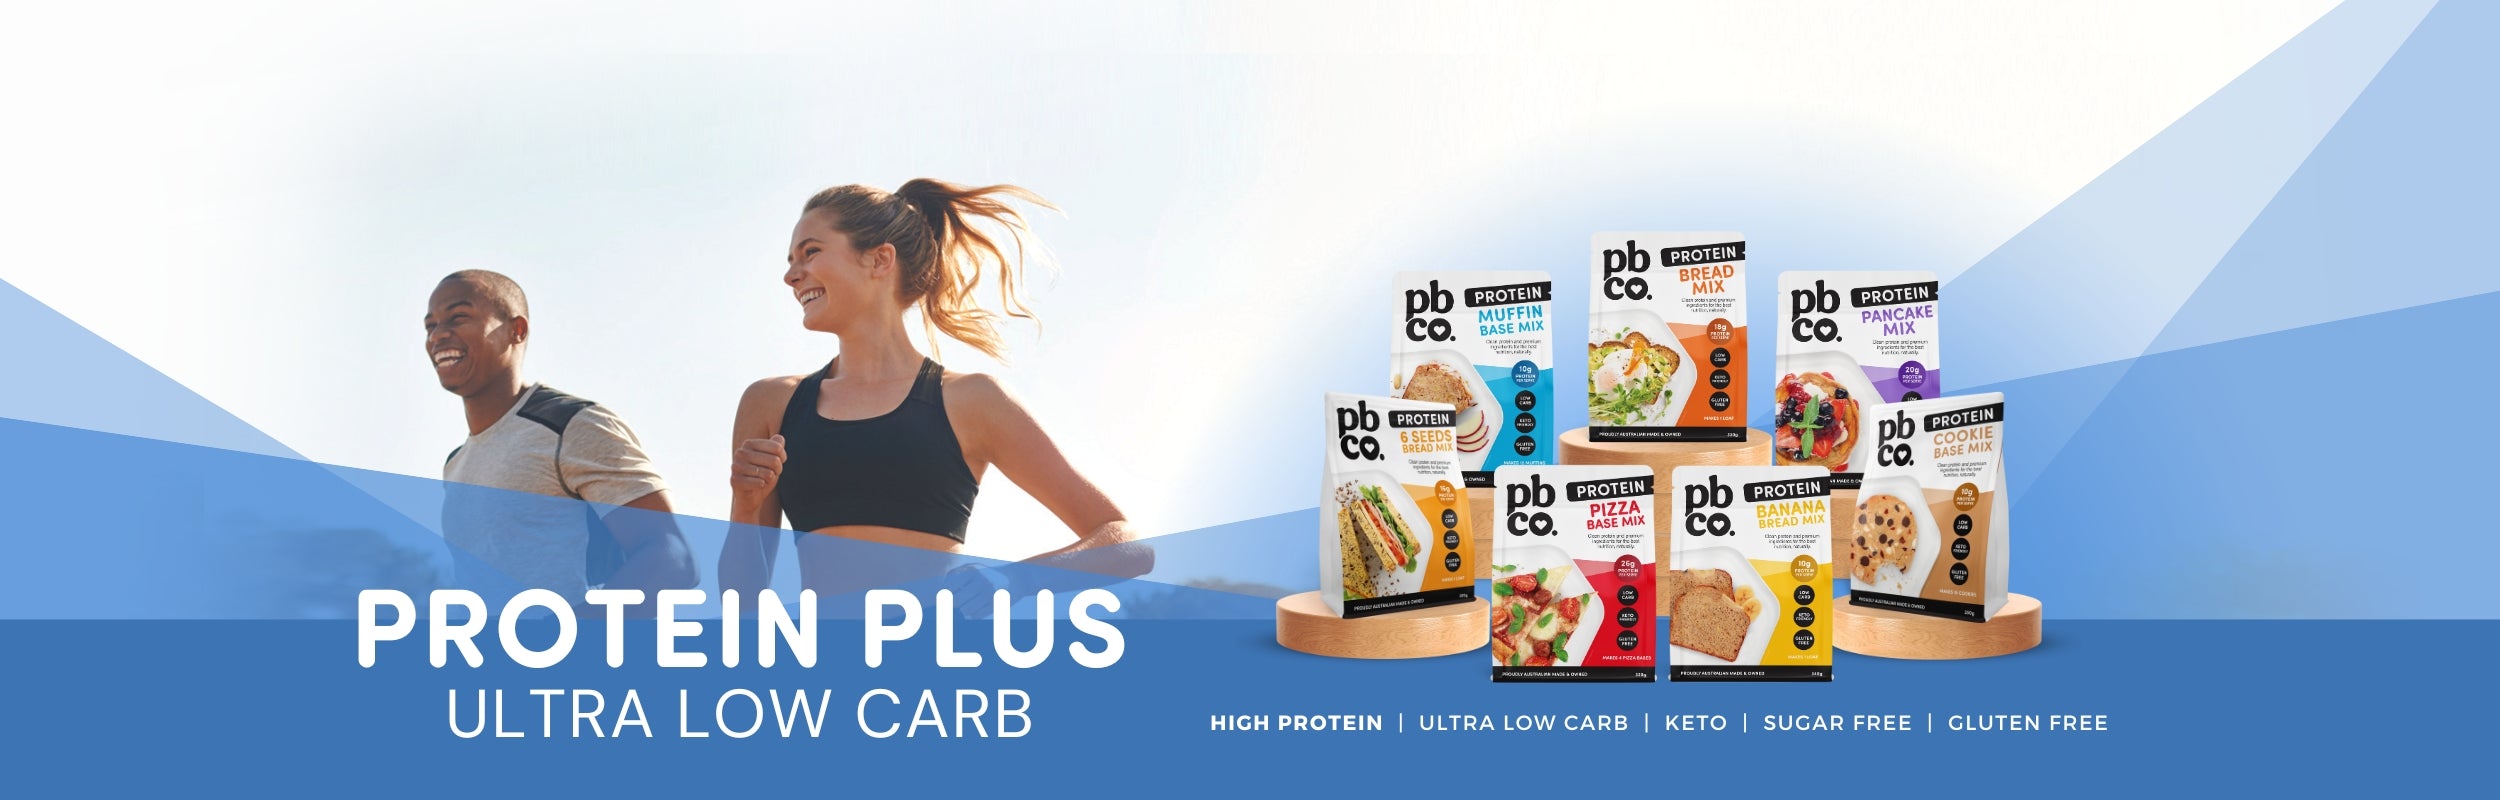 PBCo. Protein Plus Ultra Low Carb range of baking mixes fit couple running outdoors